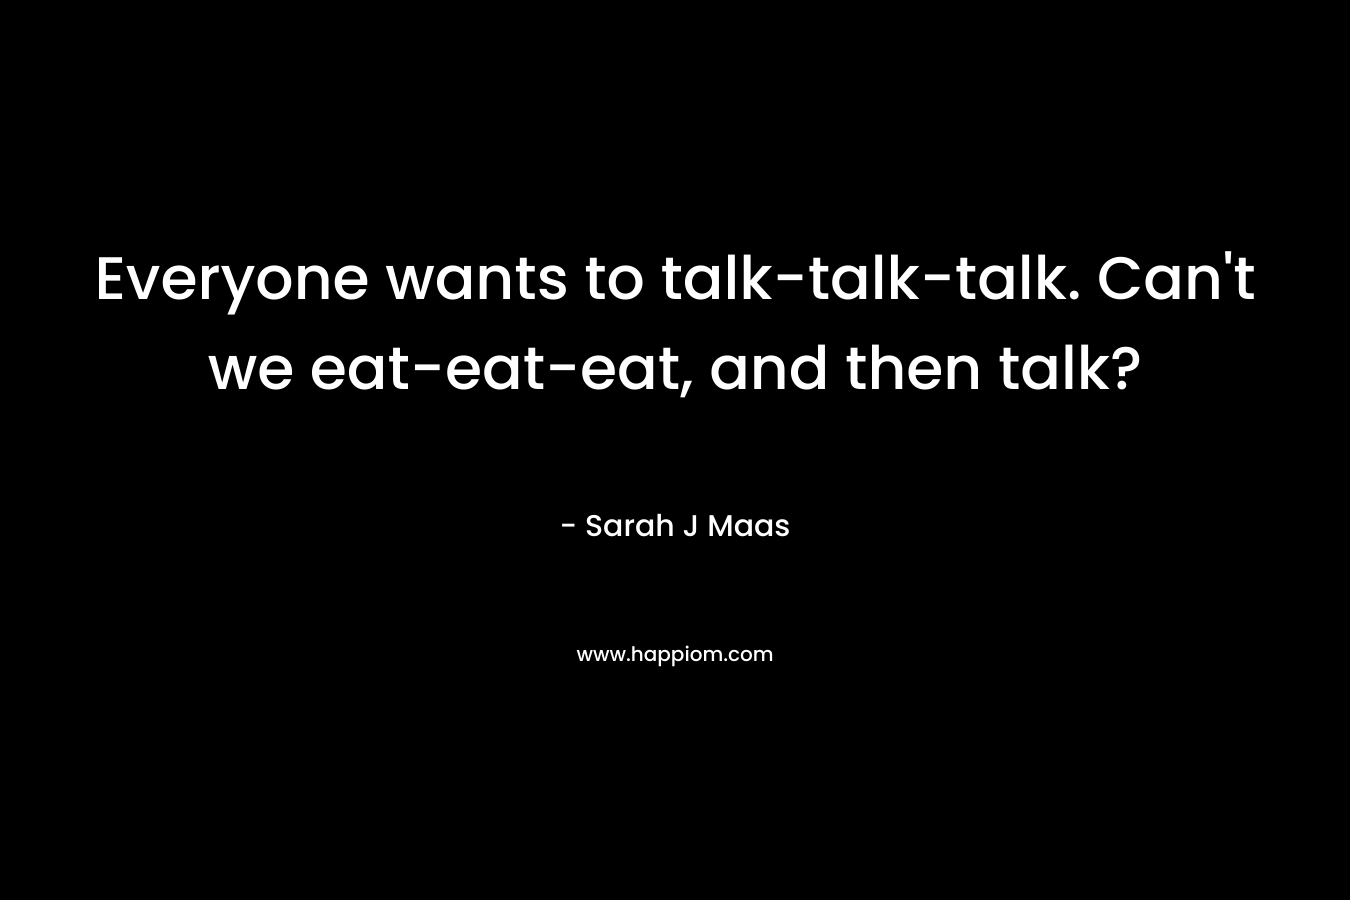 Everyone wants to talk-talk-talk. Can't we eat-eat-eat, and then talk?